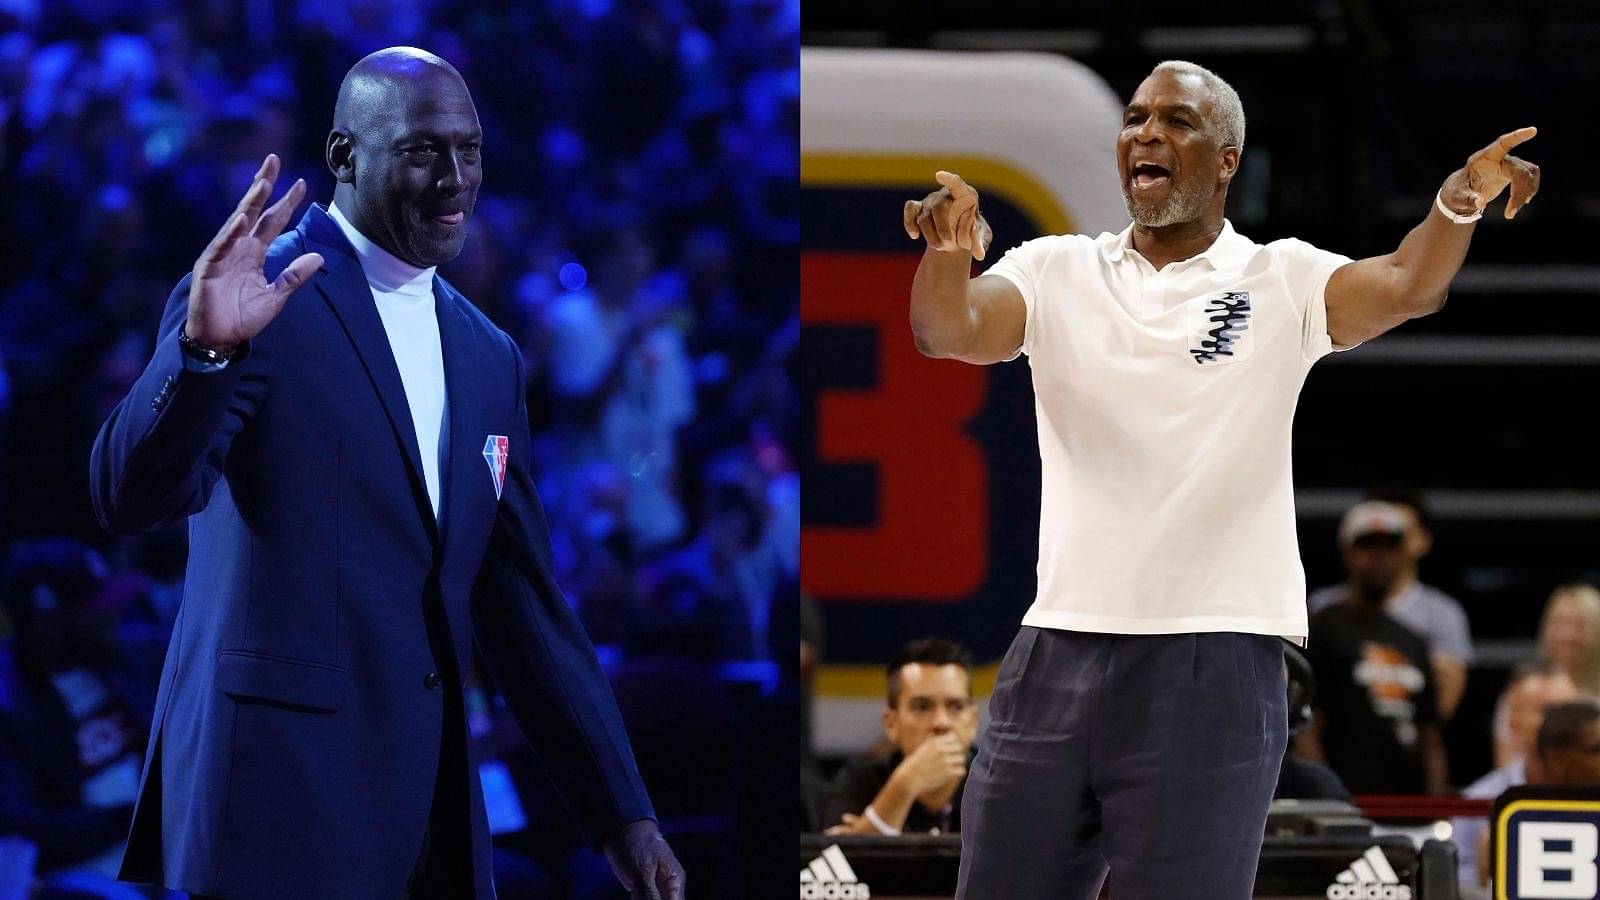 "I think I did rub off on Michael Jordan": New York Knicks legend Charles Oakley believes the GOAT got his toughness from him